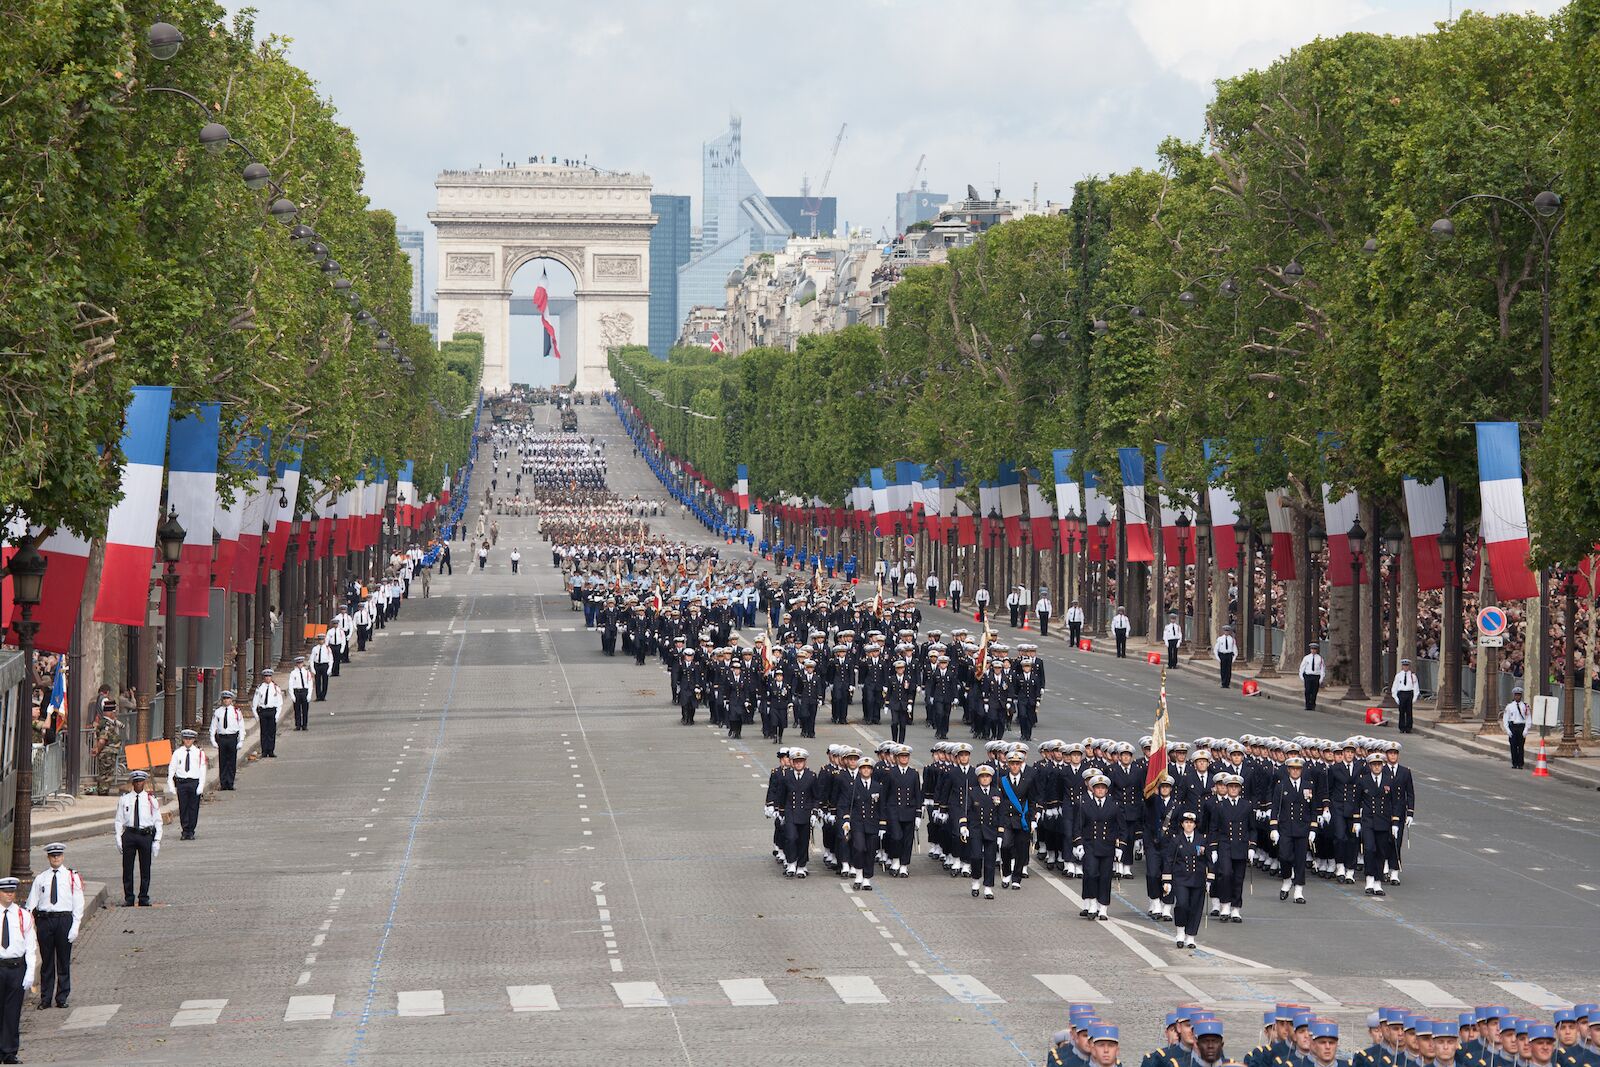 Bastille Day is one of the best events in Paris this summer